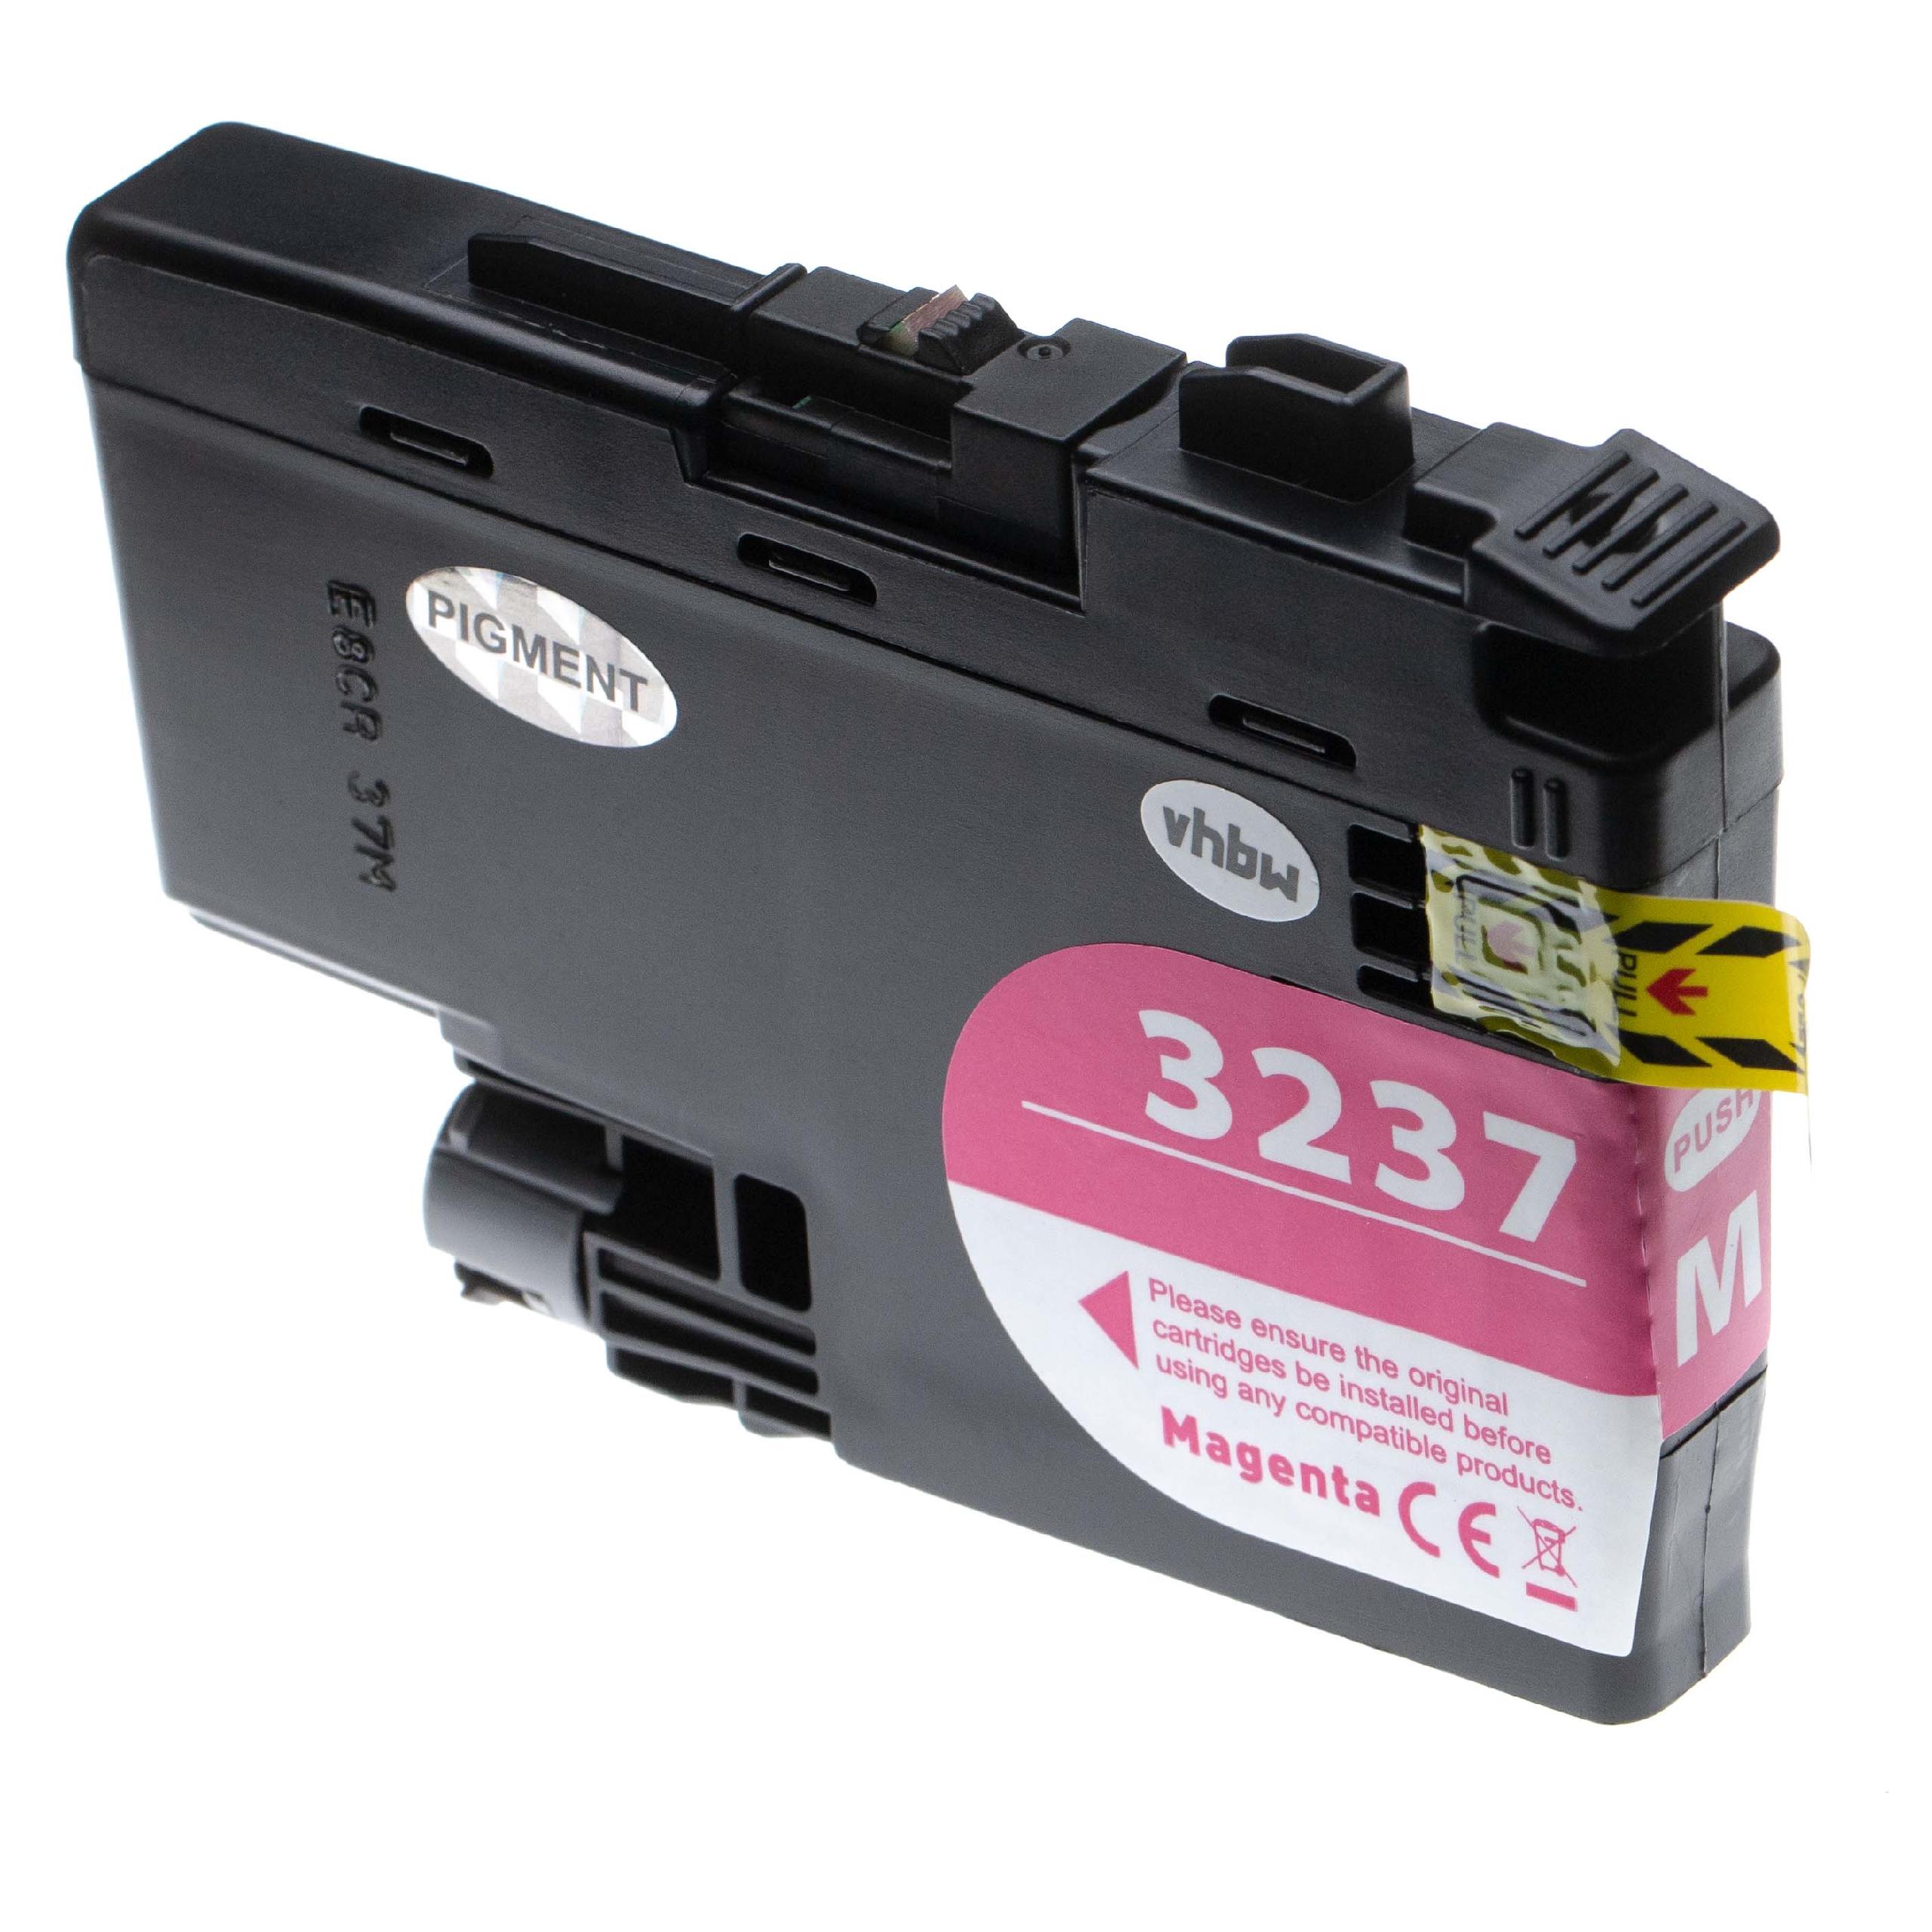 Ink Cartridge as Exchange for Brother LC-3237M, LC3237M for Brother Printer - Magenta 18.5 ml + Chip